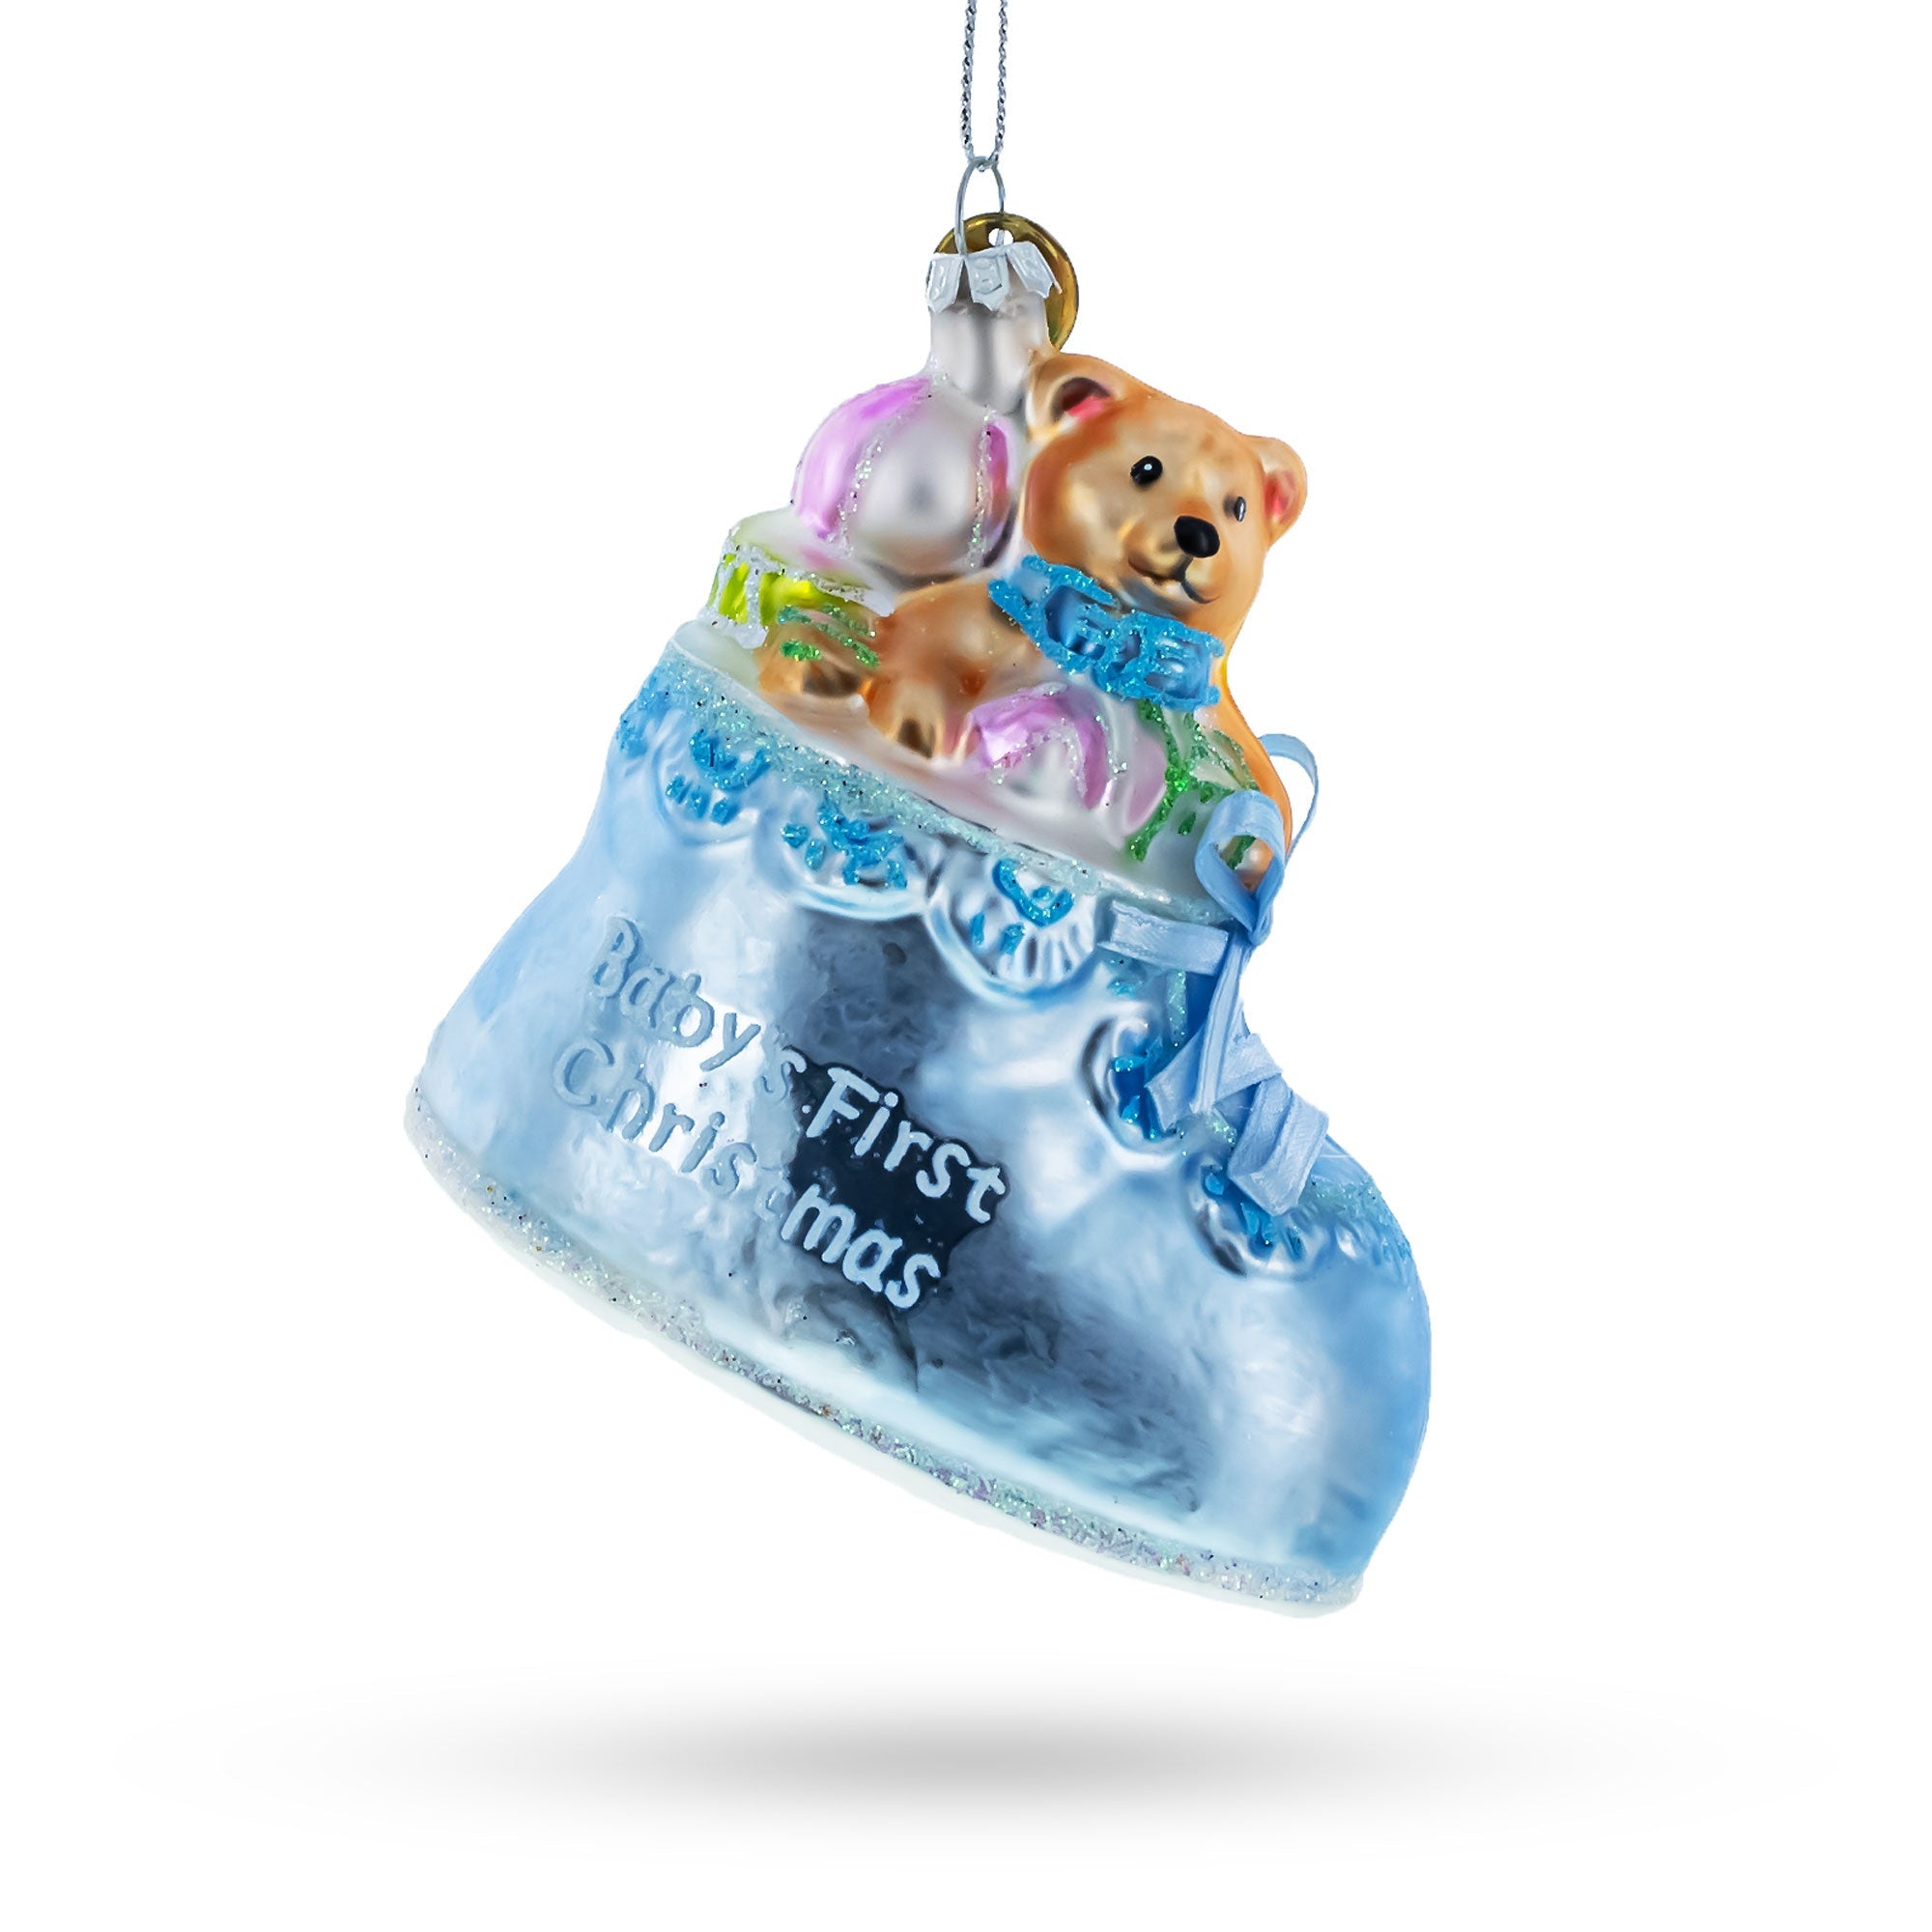 Teddy Bear Nestled In A Blue Shoe For Baby's First - Blown Glass Christmas Ornament